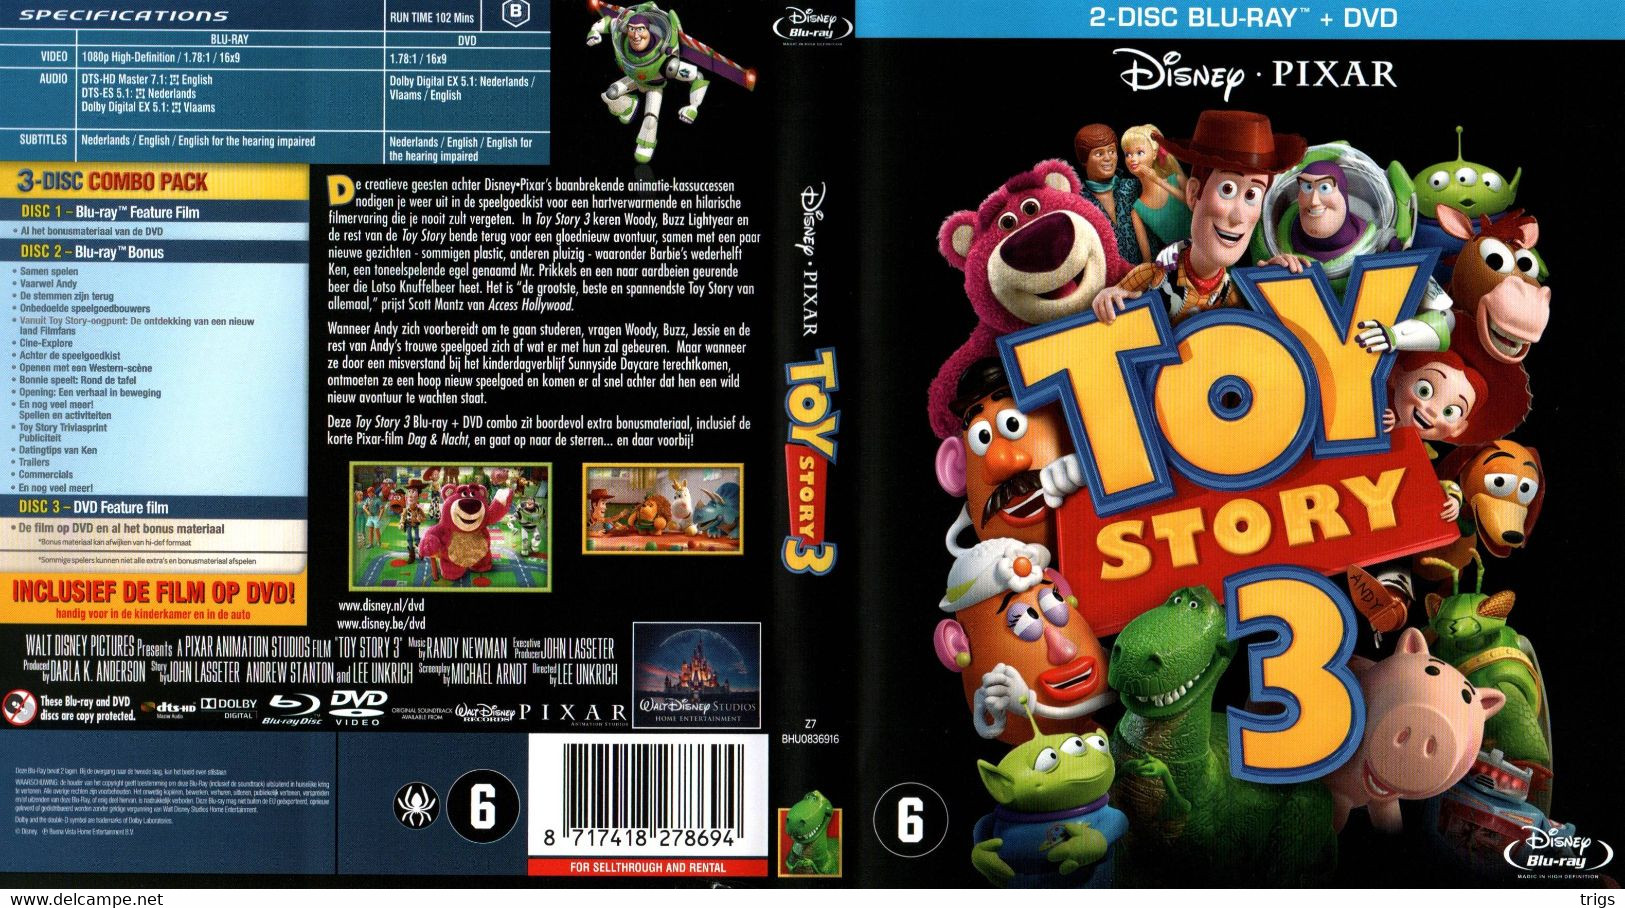 BLUE RAY & DVD - Toy Story 3 (2 BLUE RAY DISCS & 1 DVD DISC) - Animation